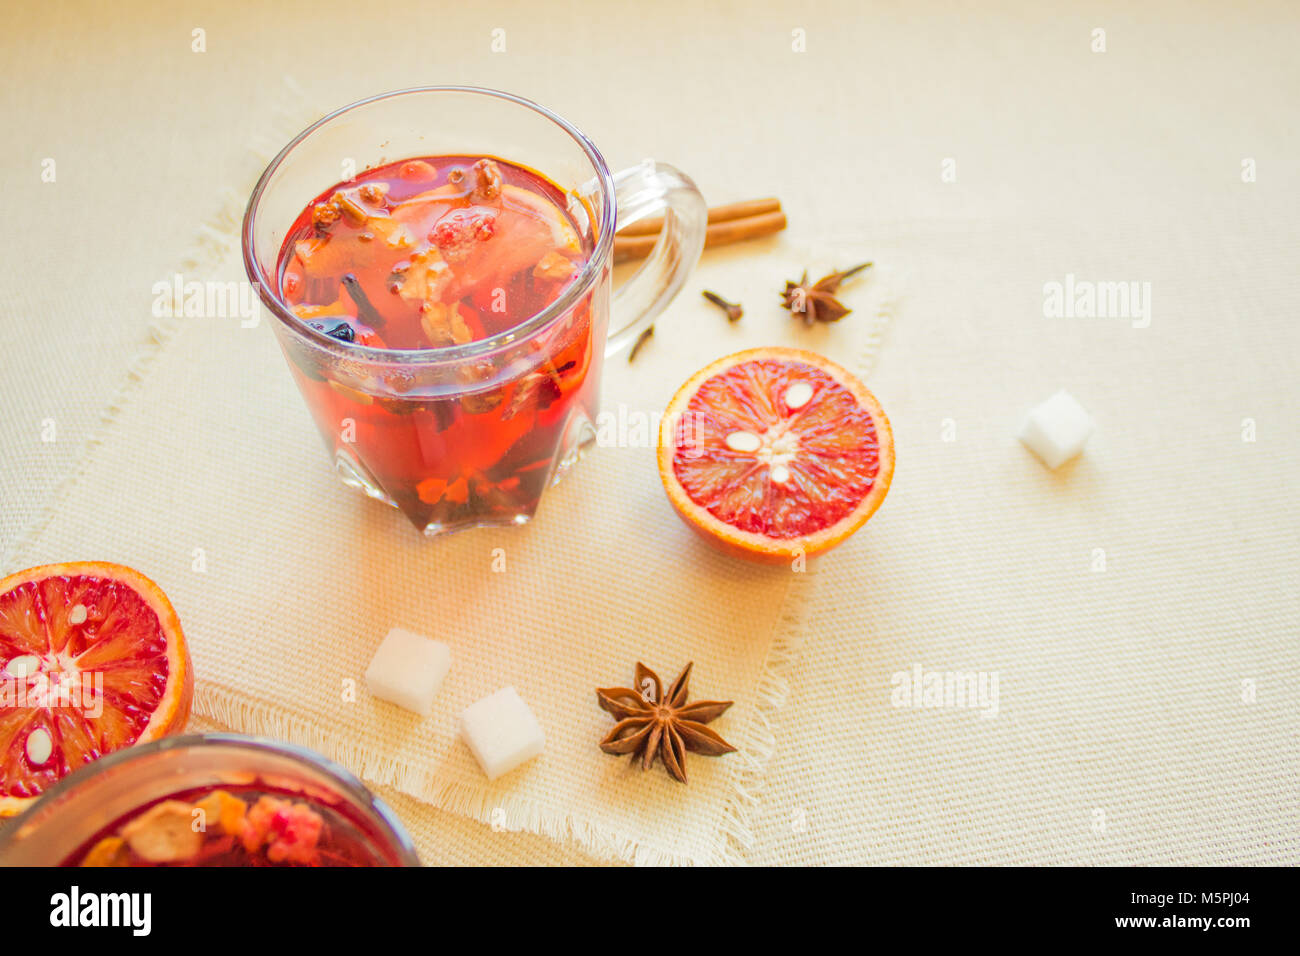 Tea made from dried fruit, seasoned with cinnamon cloves and anise seeds. There is an orange nearby Stock Photo